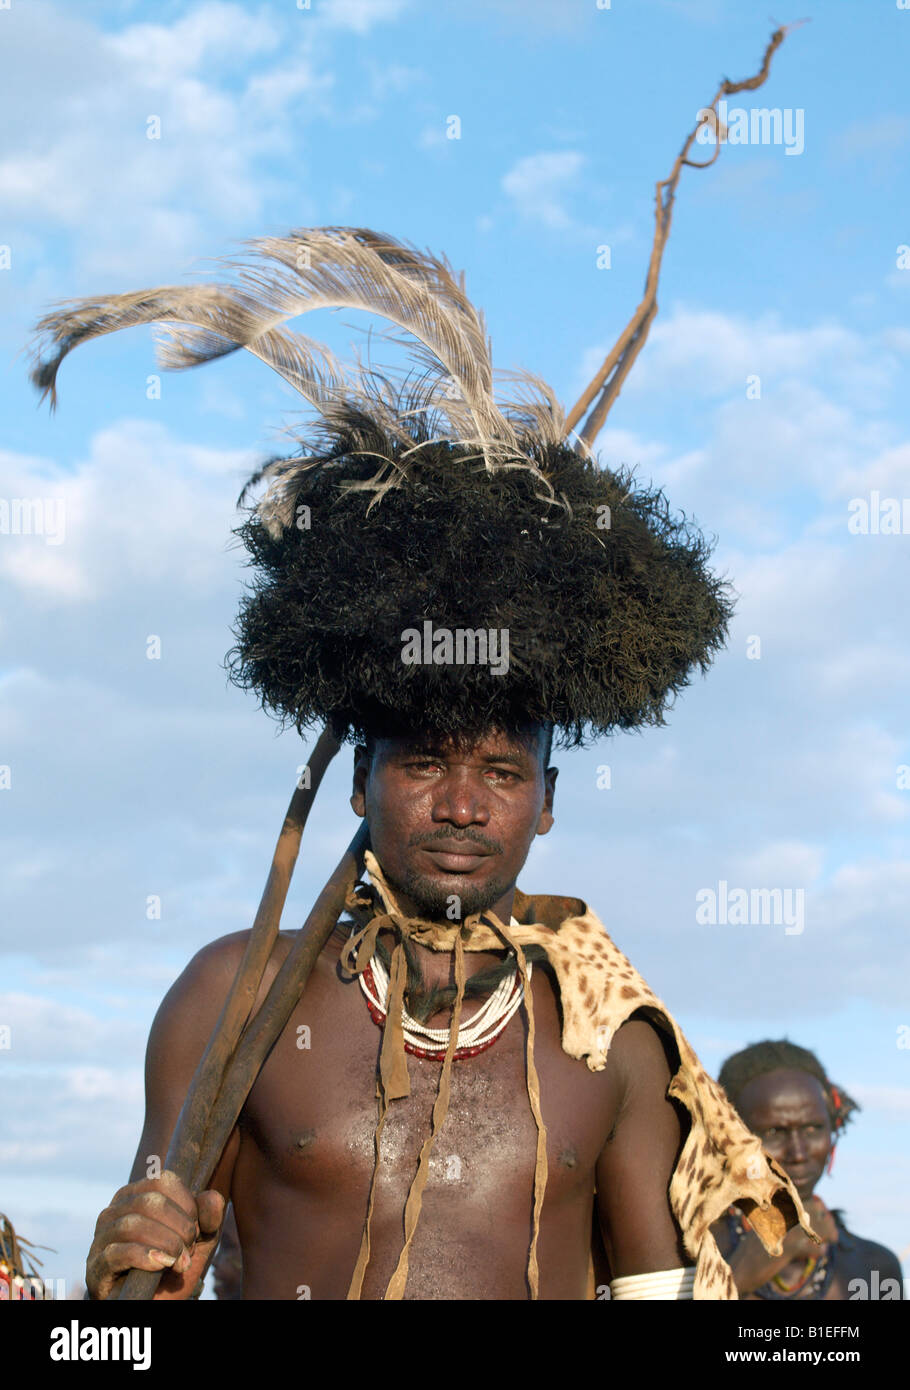 In the early morning, a Dassanech man puts on his serval cat skin cape and ostrich-feather headdress to participate. Stock Photo